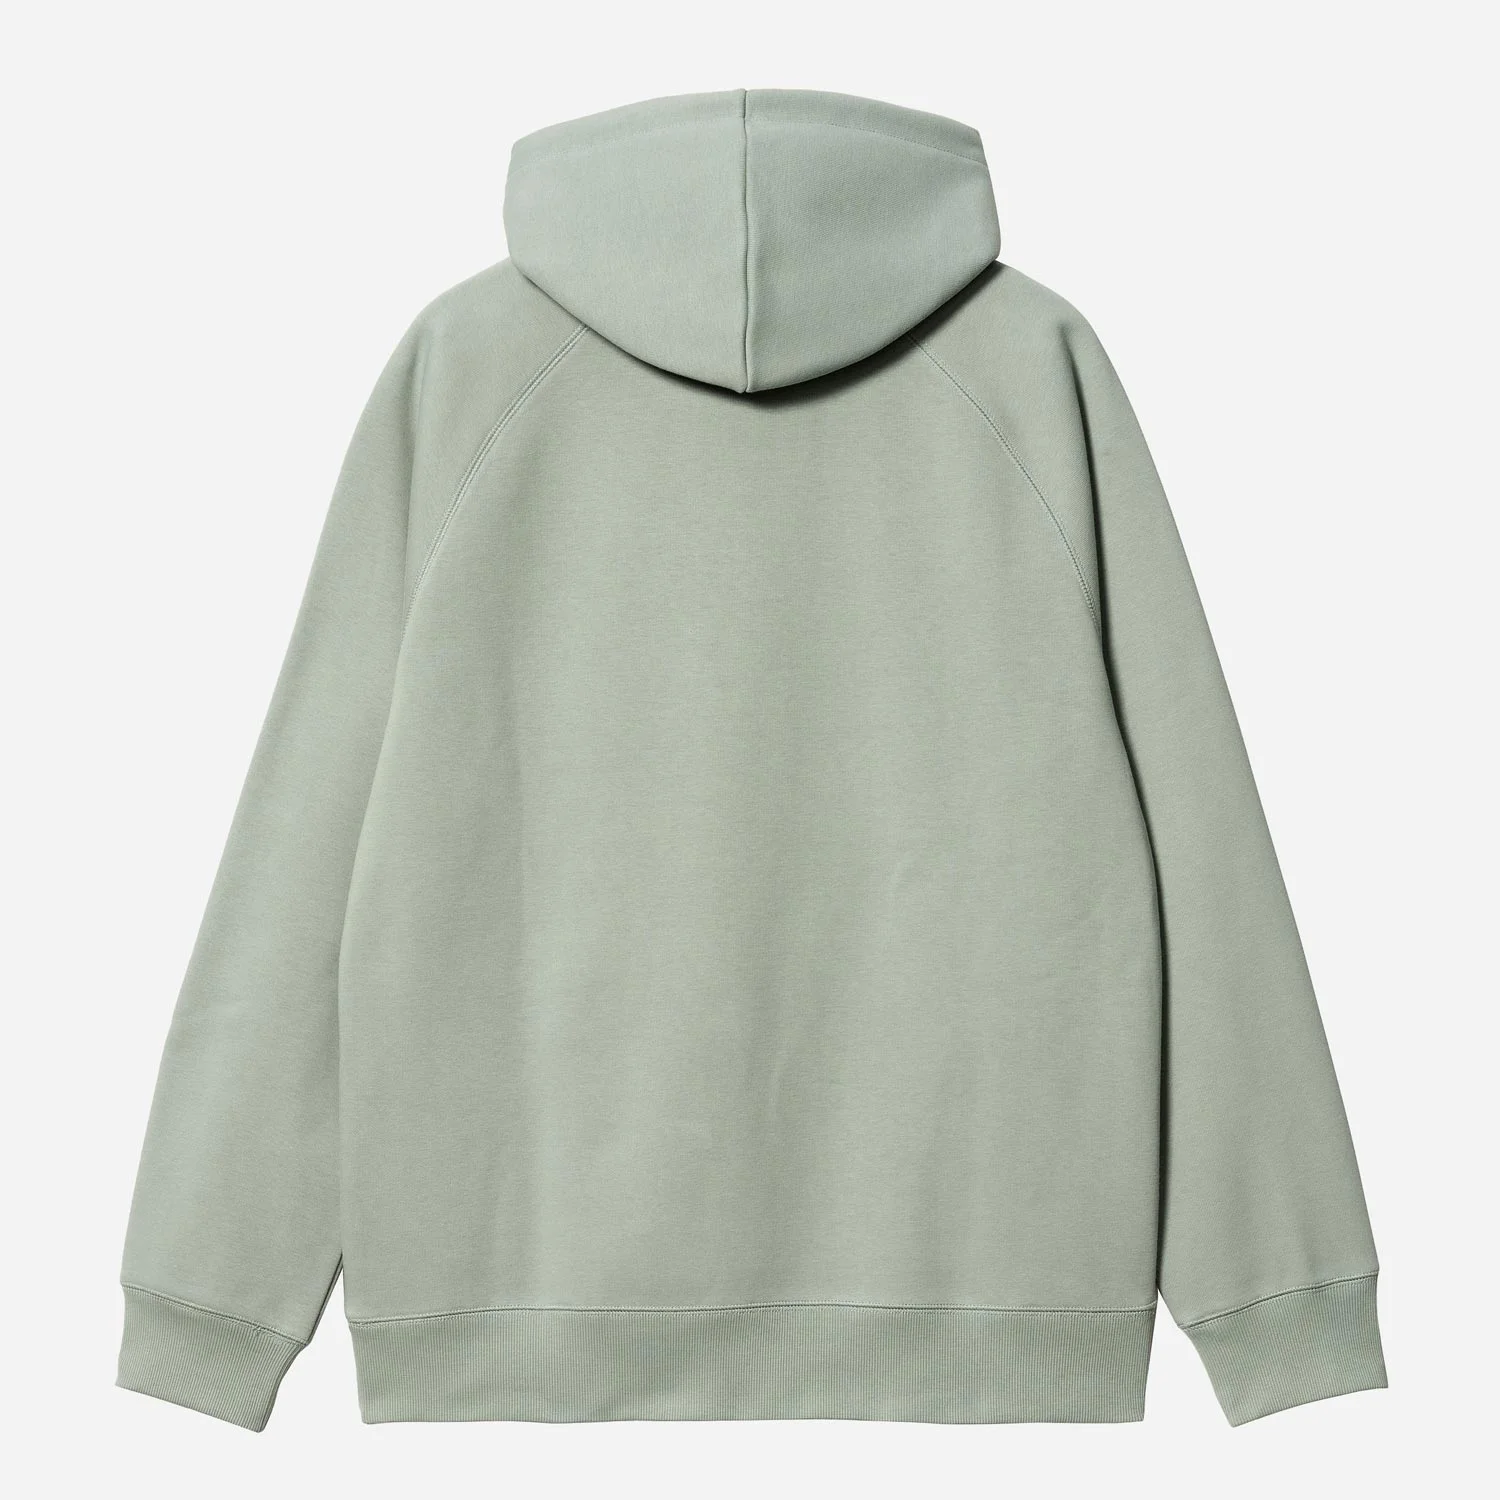 Carhartt WIP Hooded Chase Regular Fit Sweat - Glassy Teal/Gold